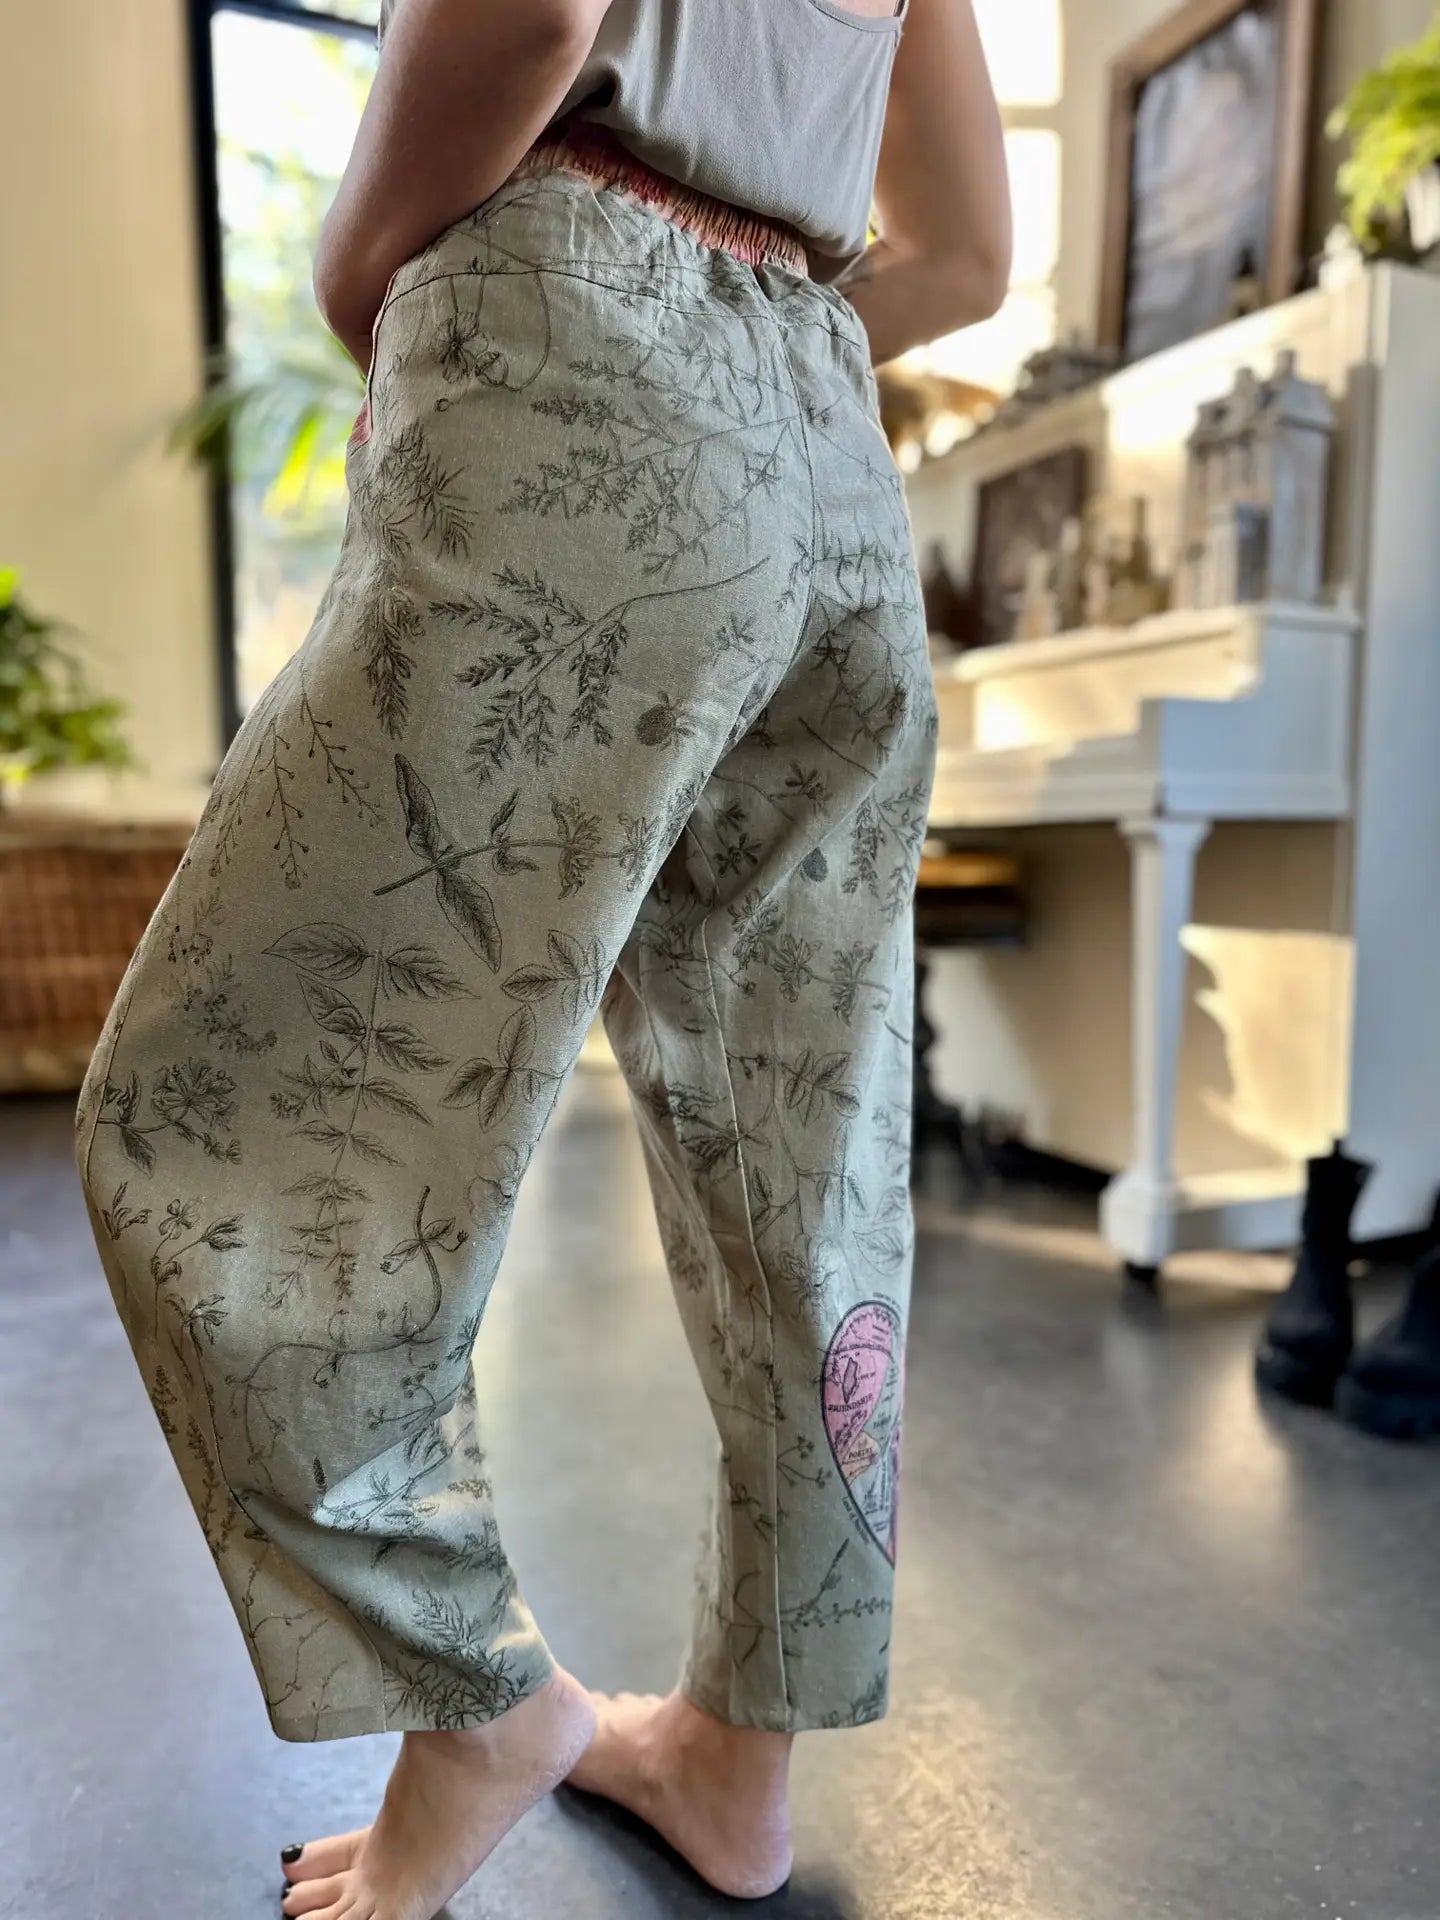 Market of Stars Map of My Heart Printed Boho Artist Pants in Sage casual and comfy pants - Style Society Marketplace